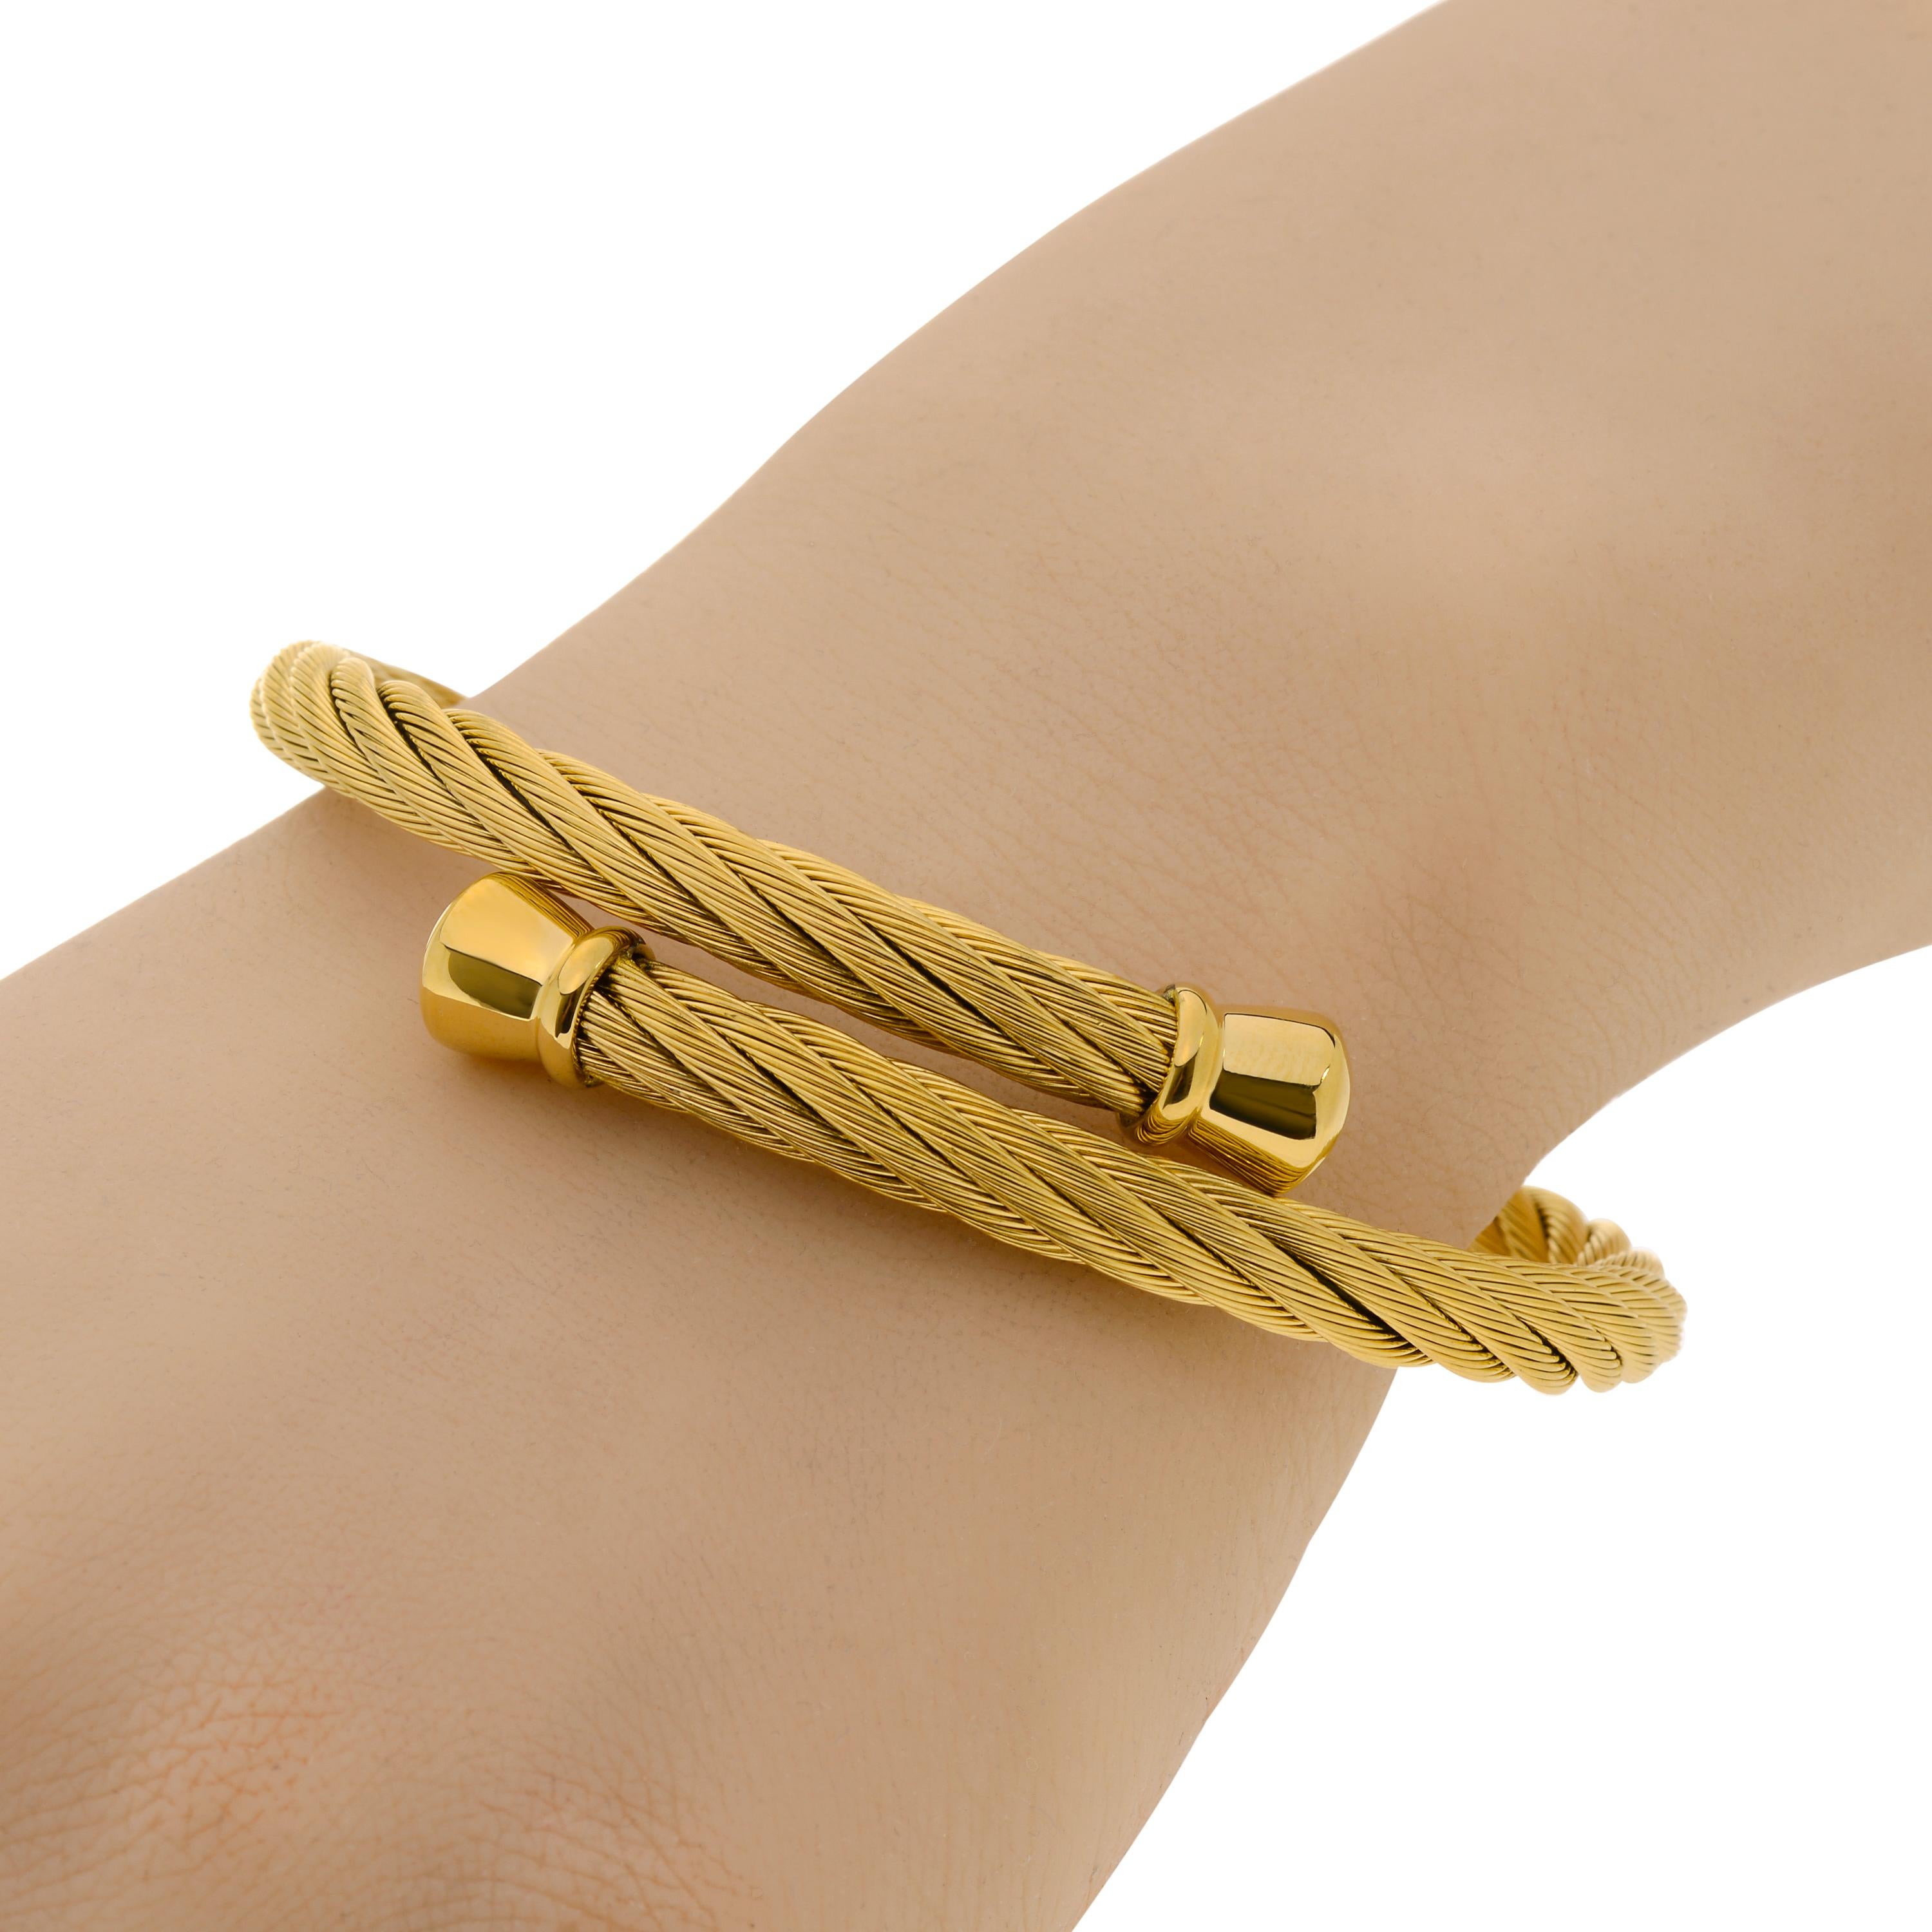 Alor stainless steel wrap bracelet features woven strands of yellow pvd stainless steel with decorative stainless steel end caps. The band width is 6mm. The length is 7.5